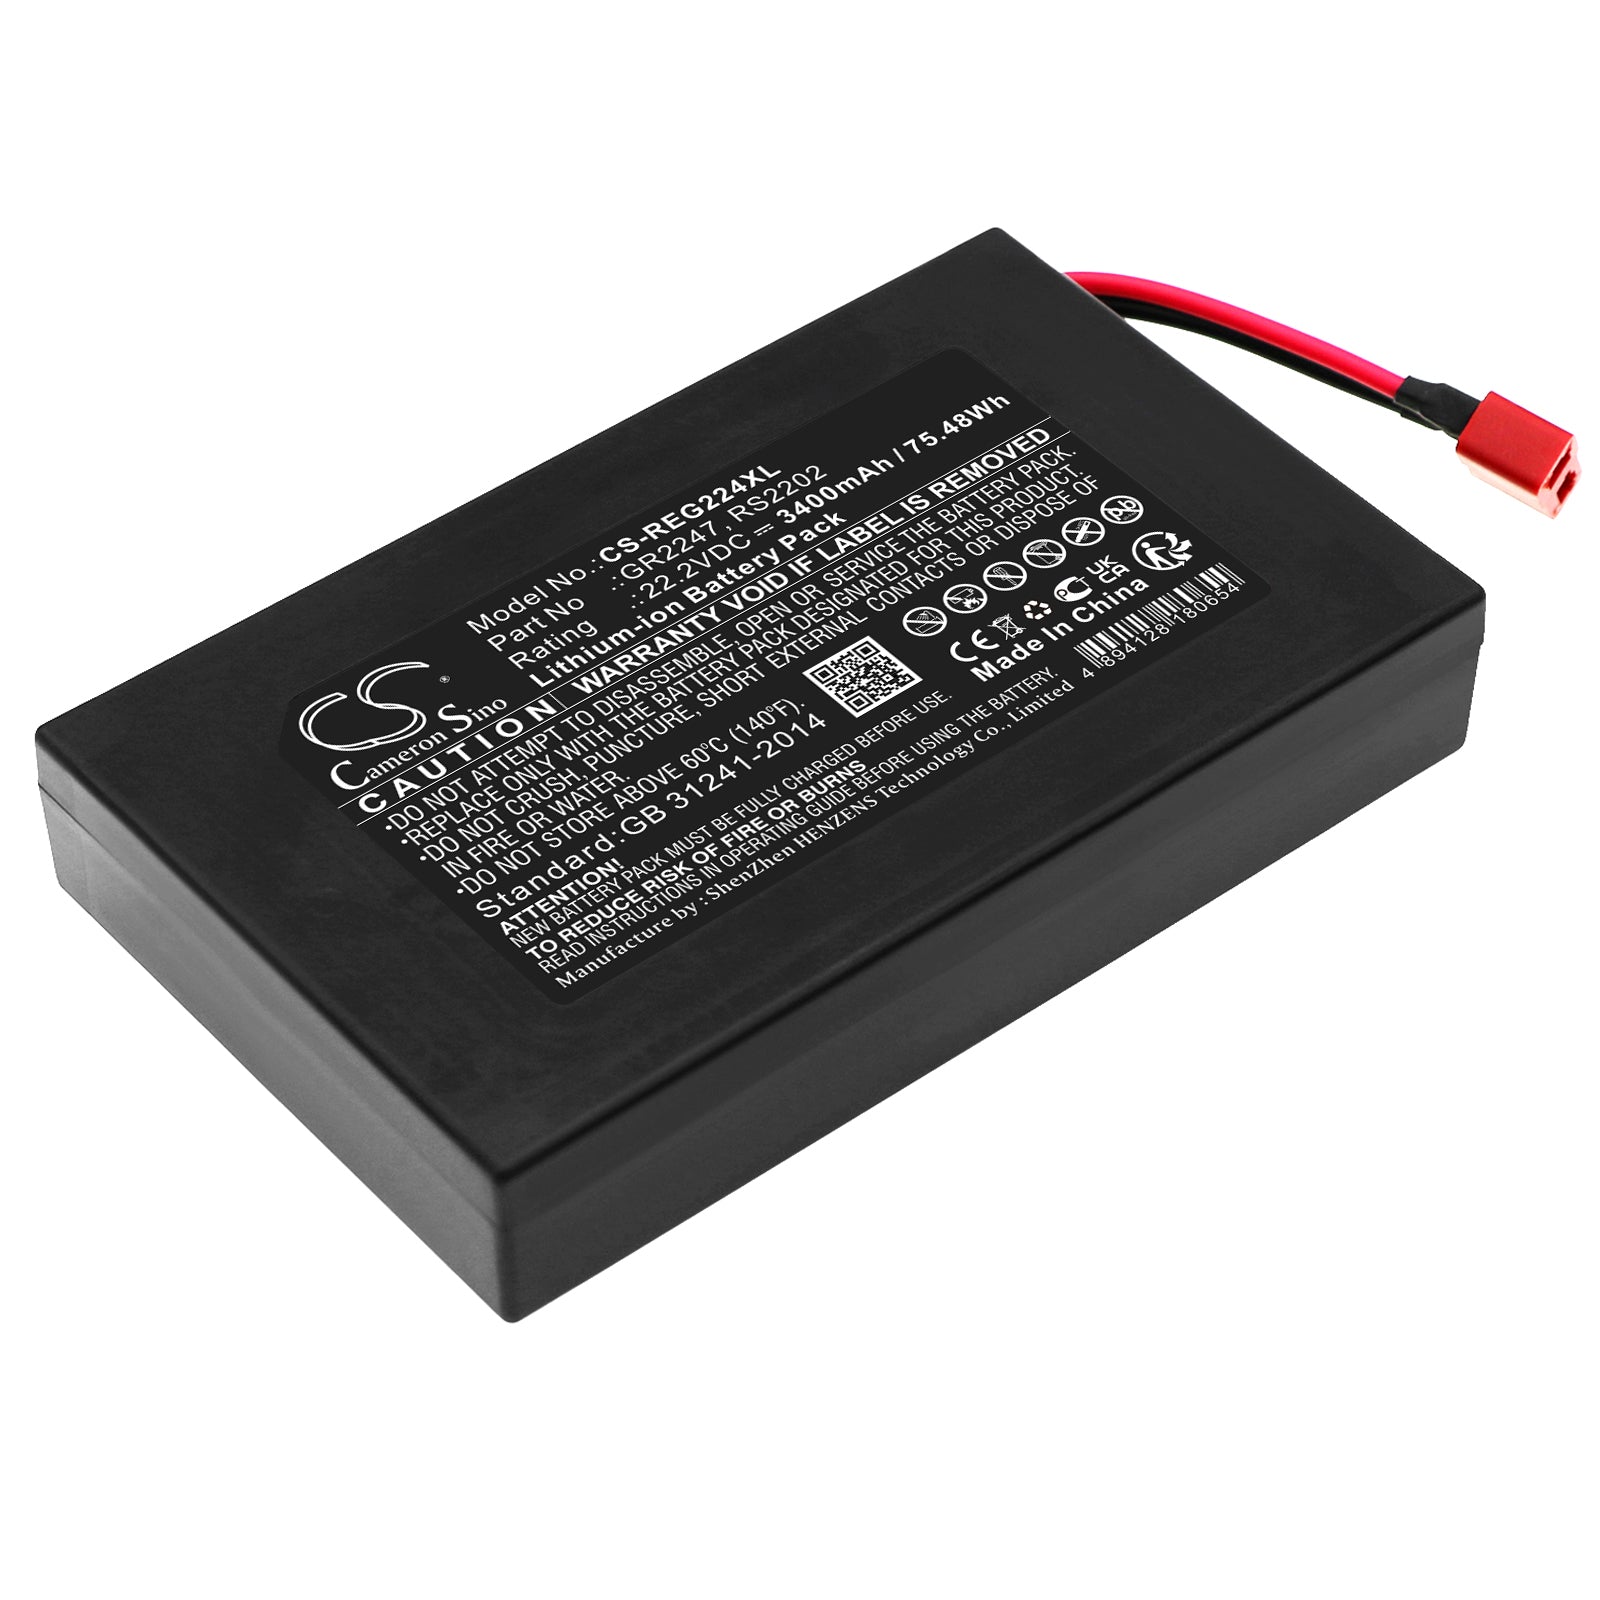 3400mAh GR2247, RS2202 High Capacity Battery for Razor RipStik Electric Caster Board Scooter-SMAVtronics